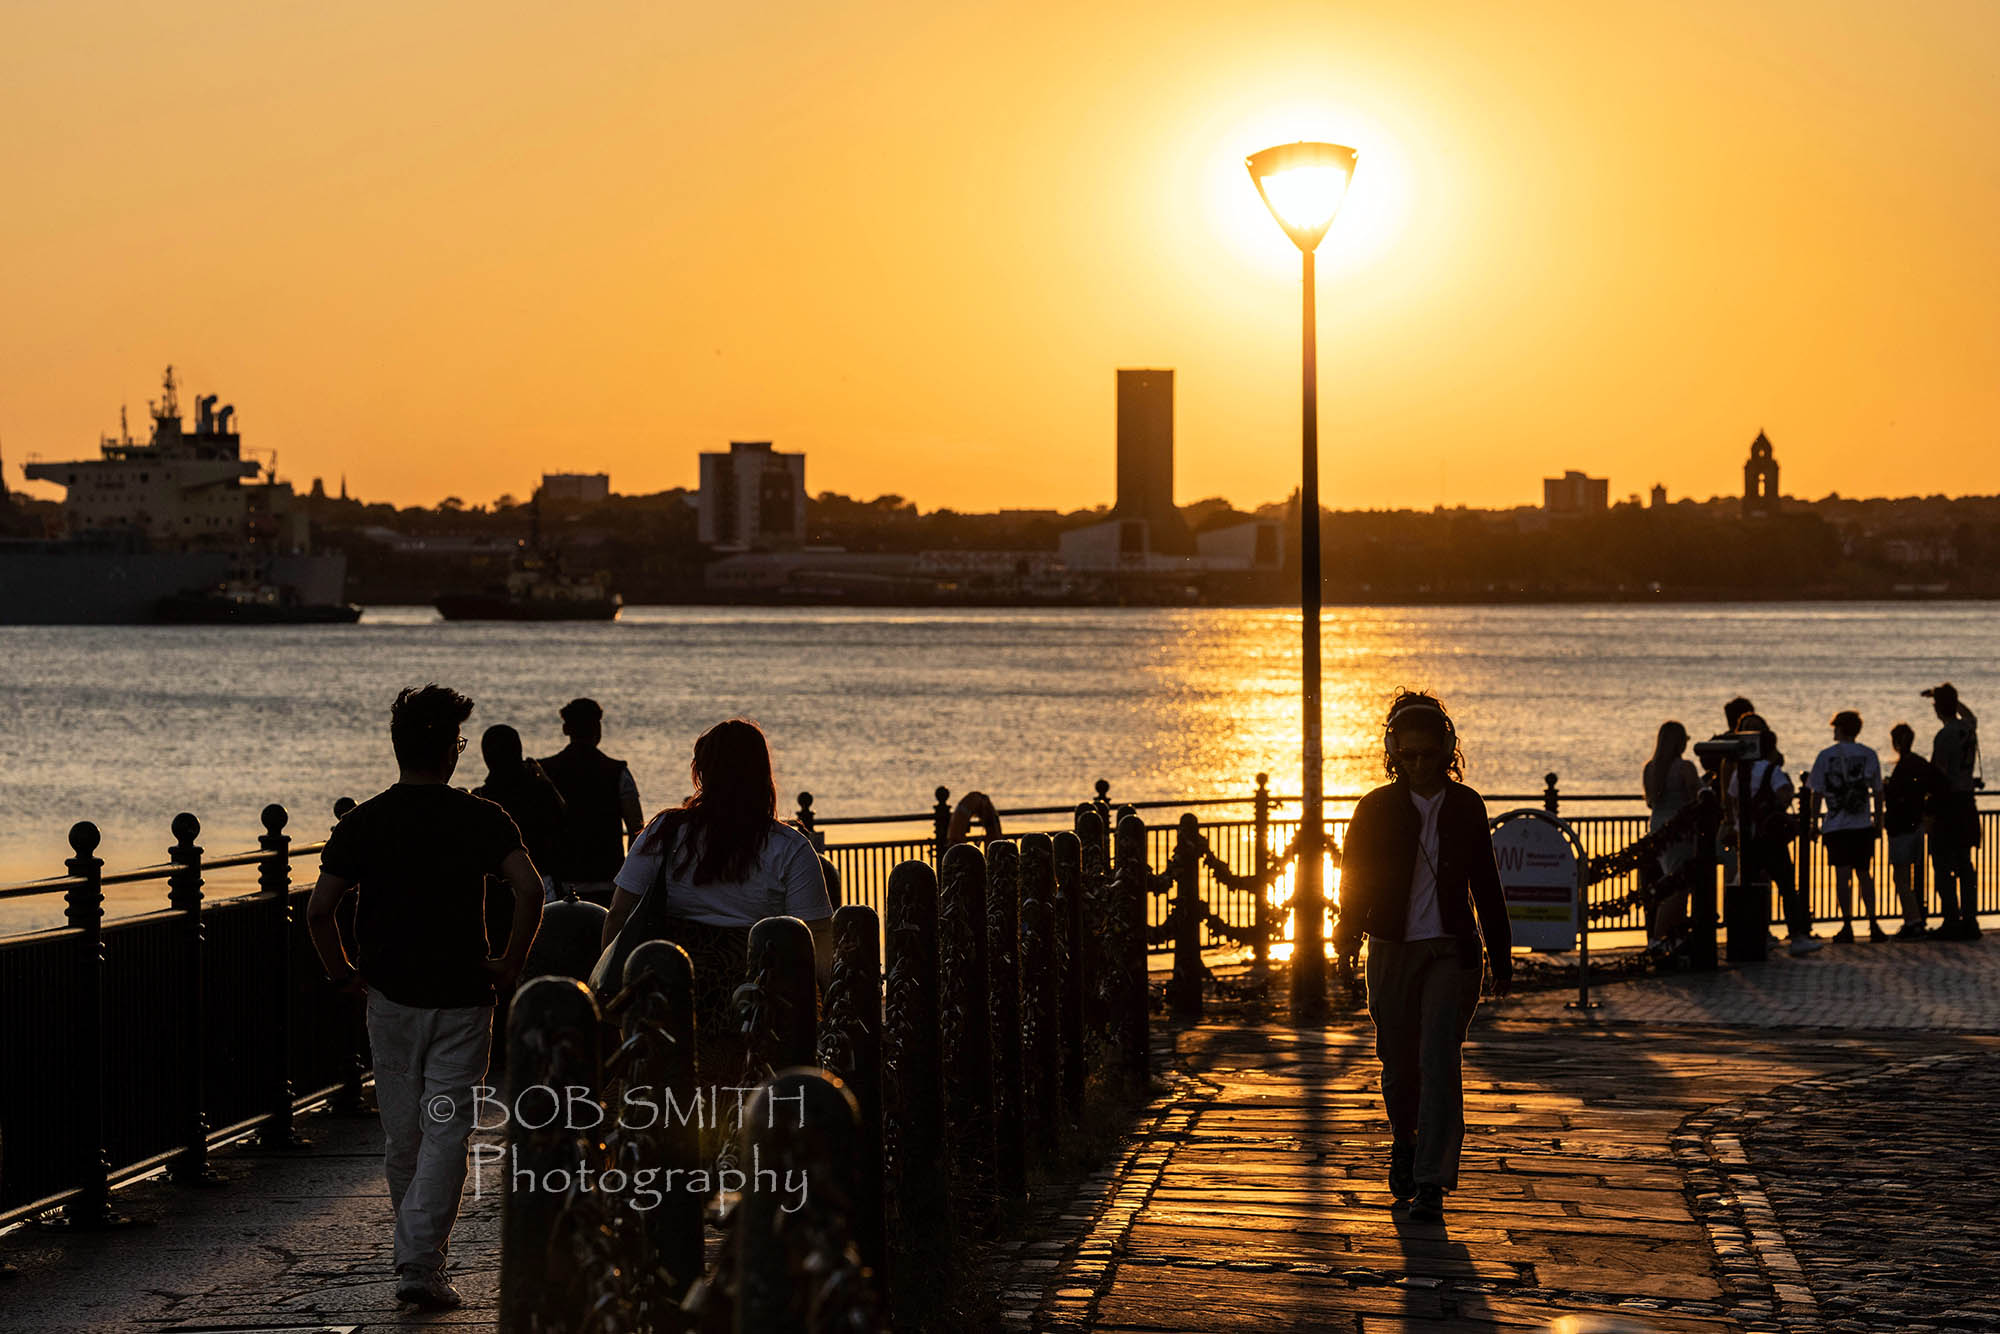 Sunset on the Mersey at Liverpool.